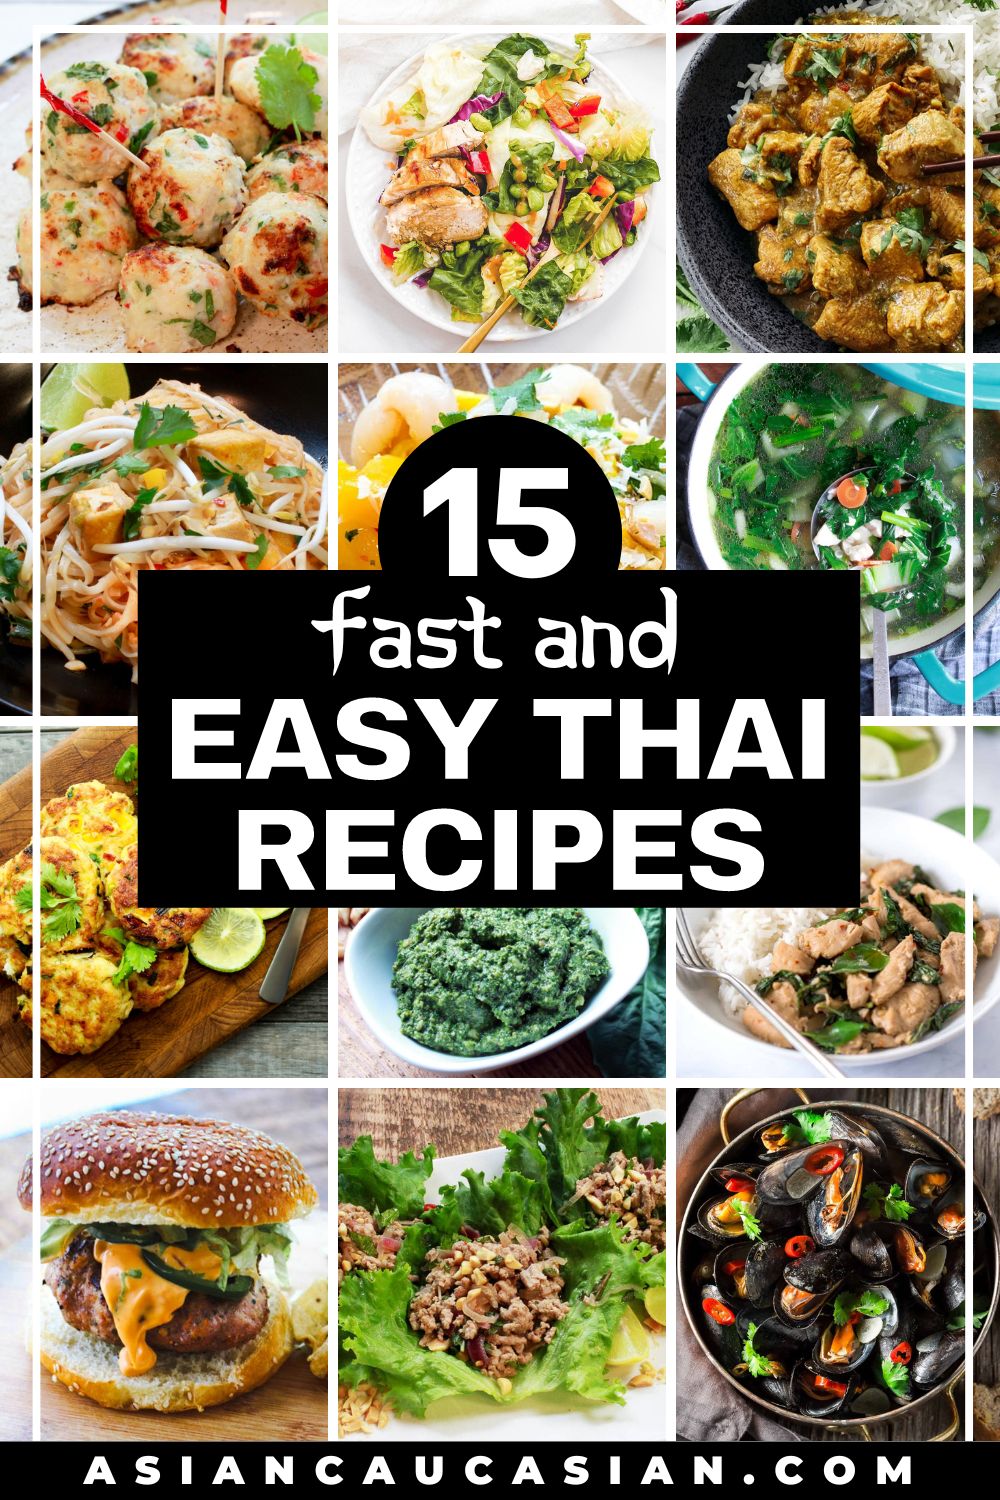 A photo collage of tasty and colorful Thai dishes.